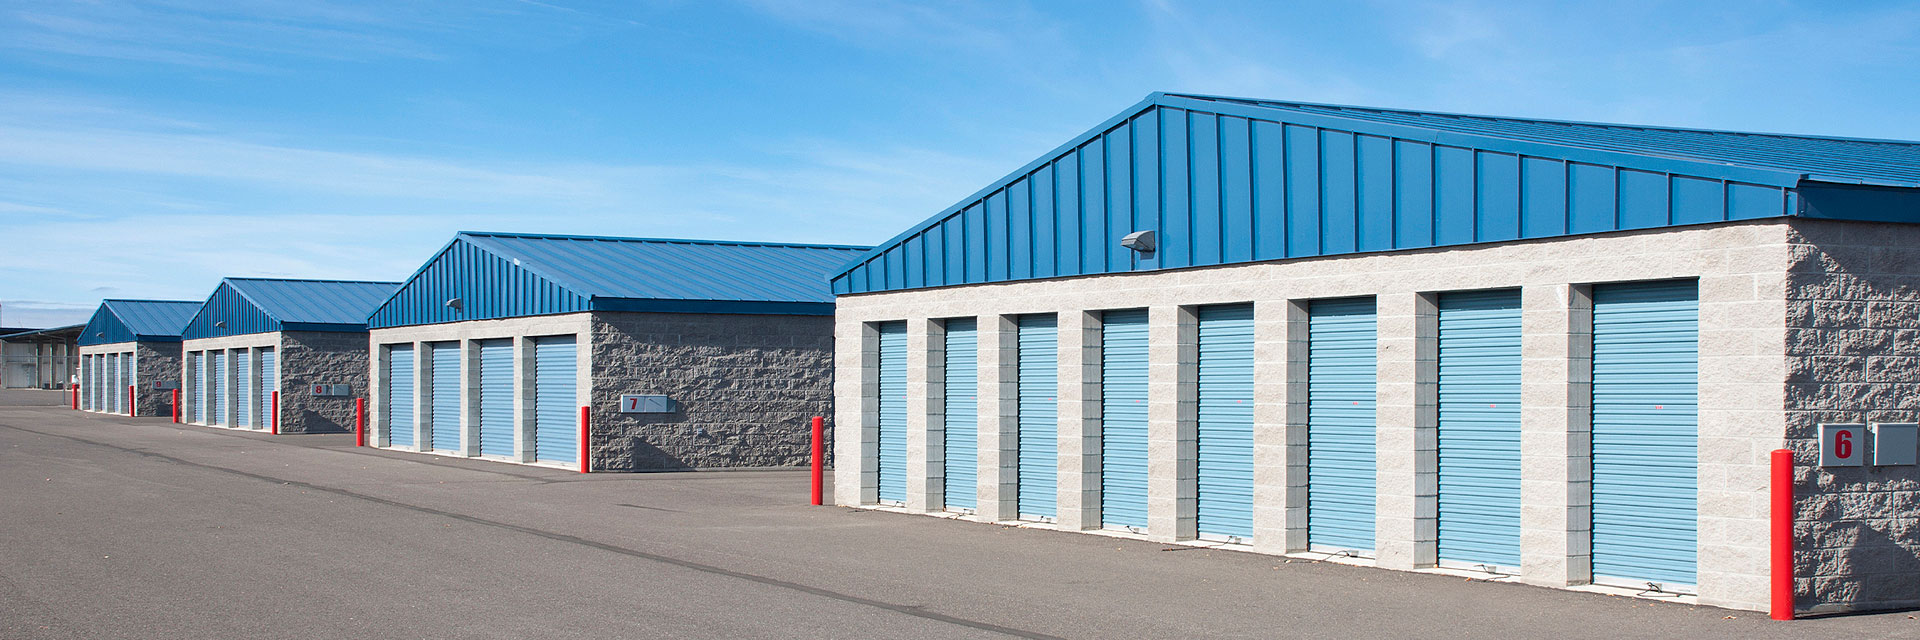 Why Are Self Storage Magazines So Popular?